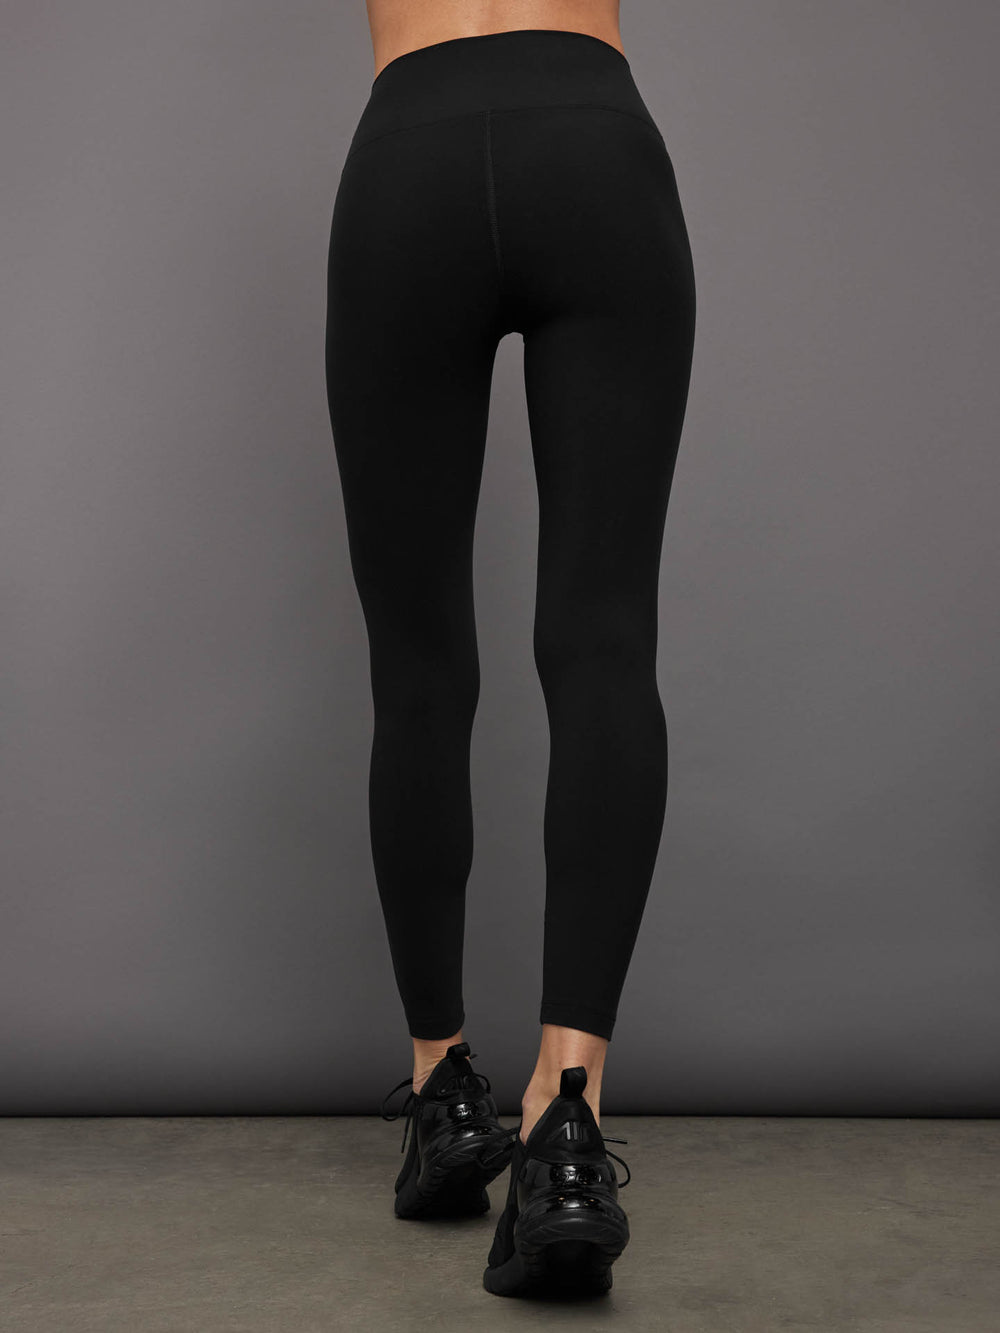 These 13 Bestselling Leggings are the Best Carbon38 Leggings Right Now